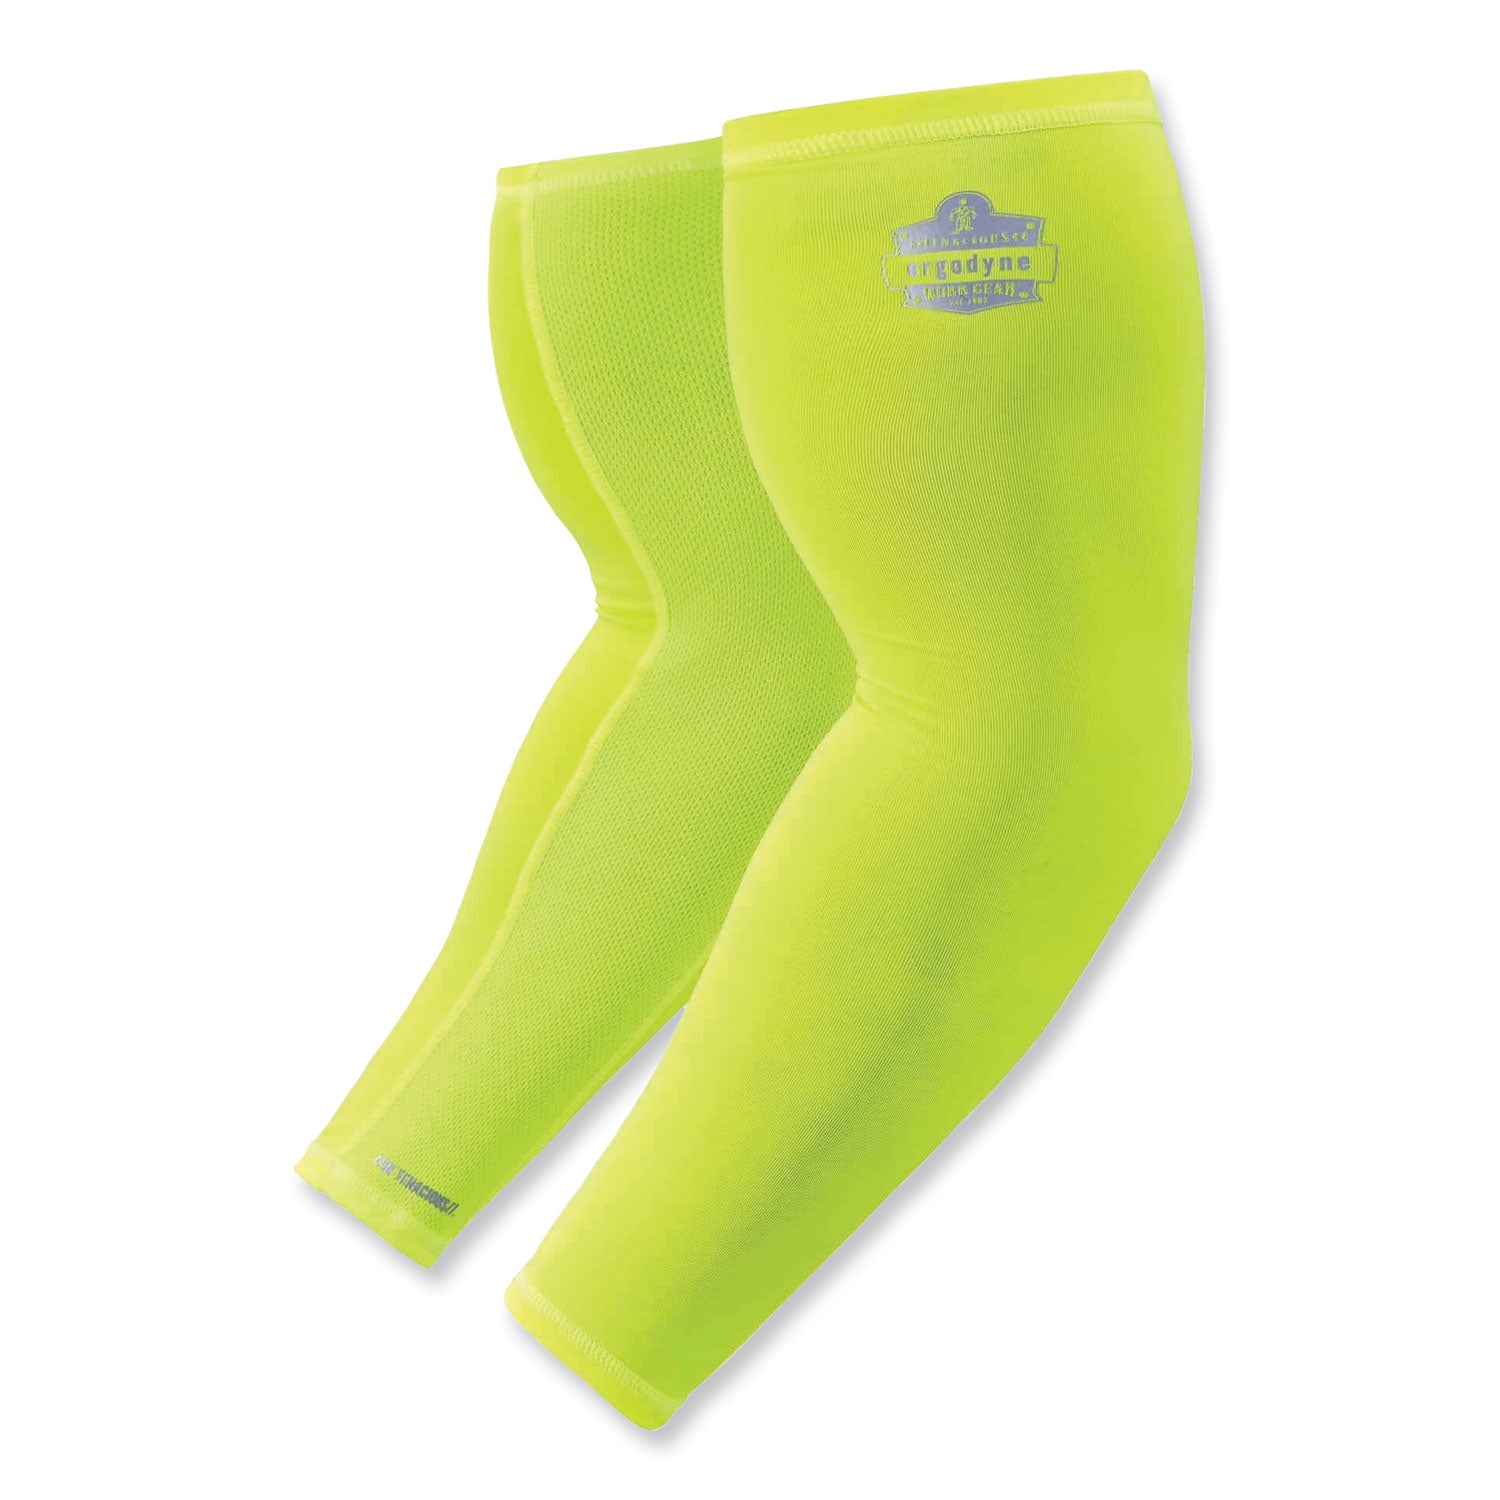 chill-its-6690-performance-knit-cooling-arm-sleeve-polyester-spandex-large-lime-2-sleeves-ships-in-1-3-business-days_ego12284 - 1